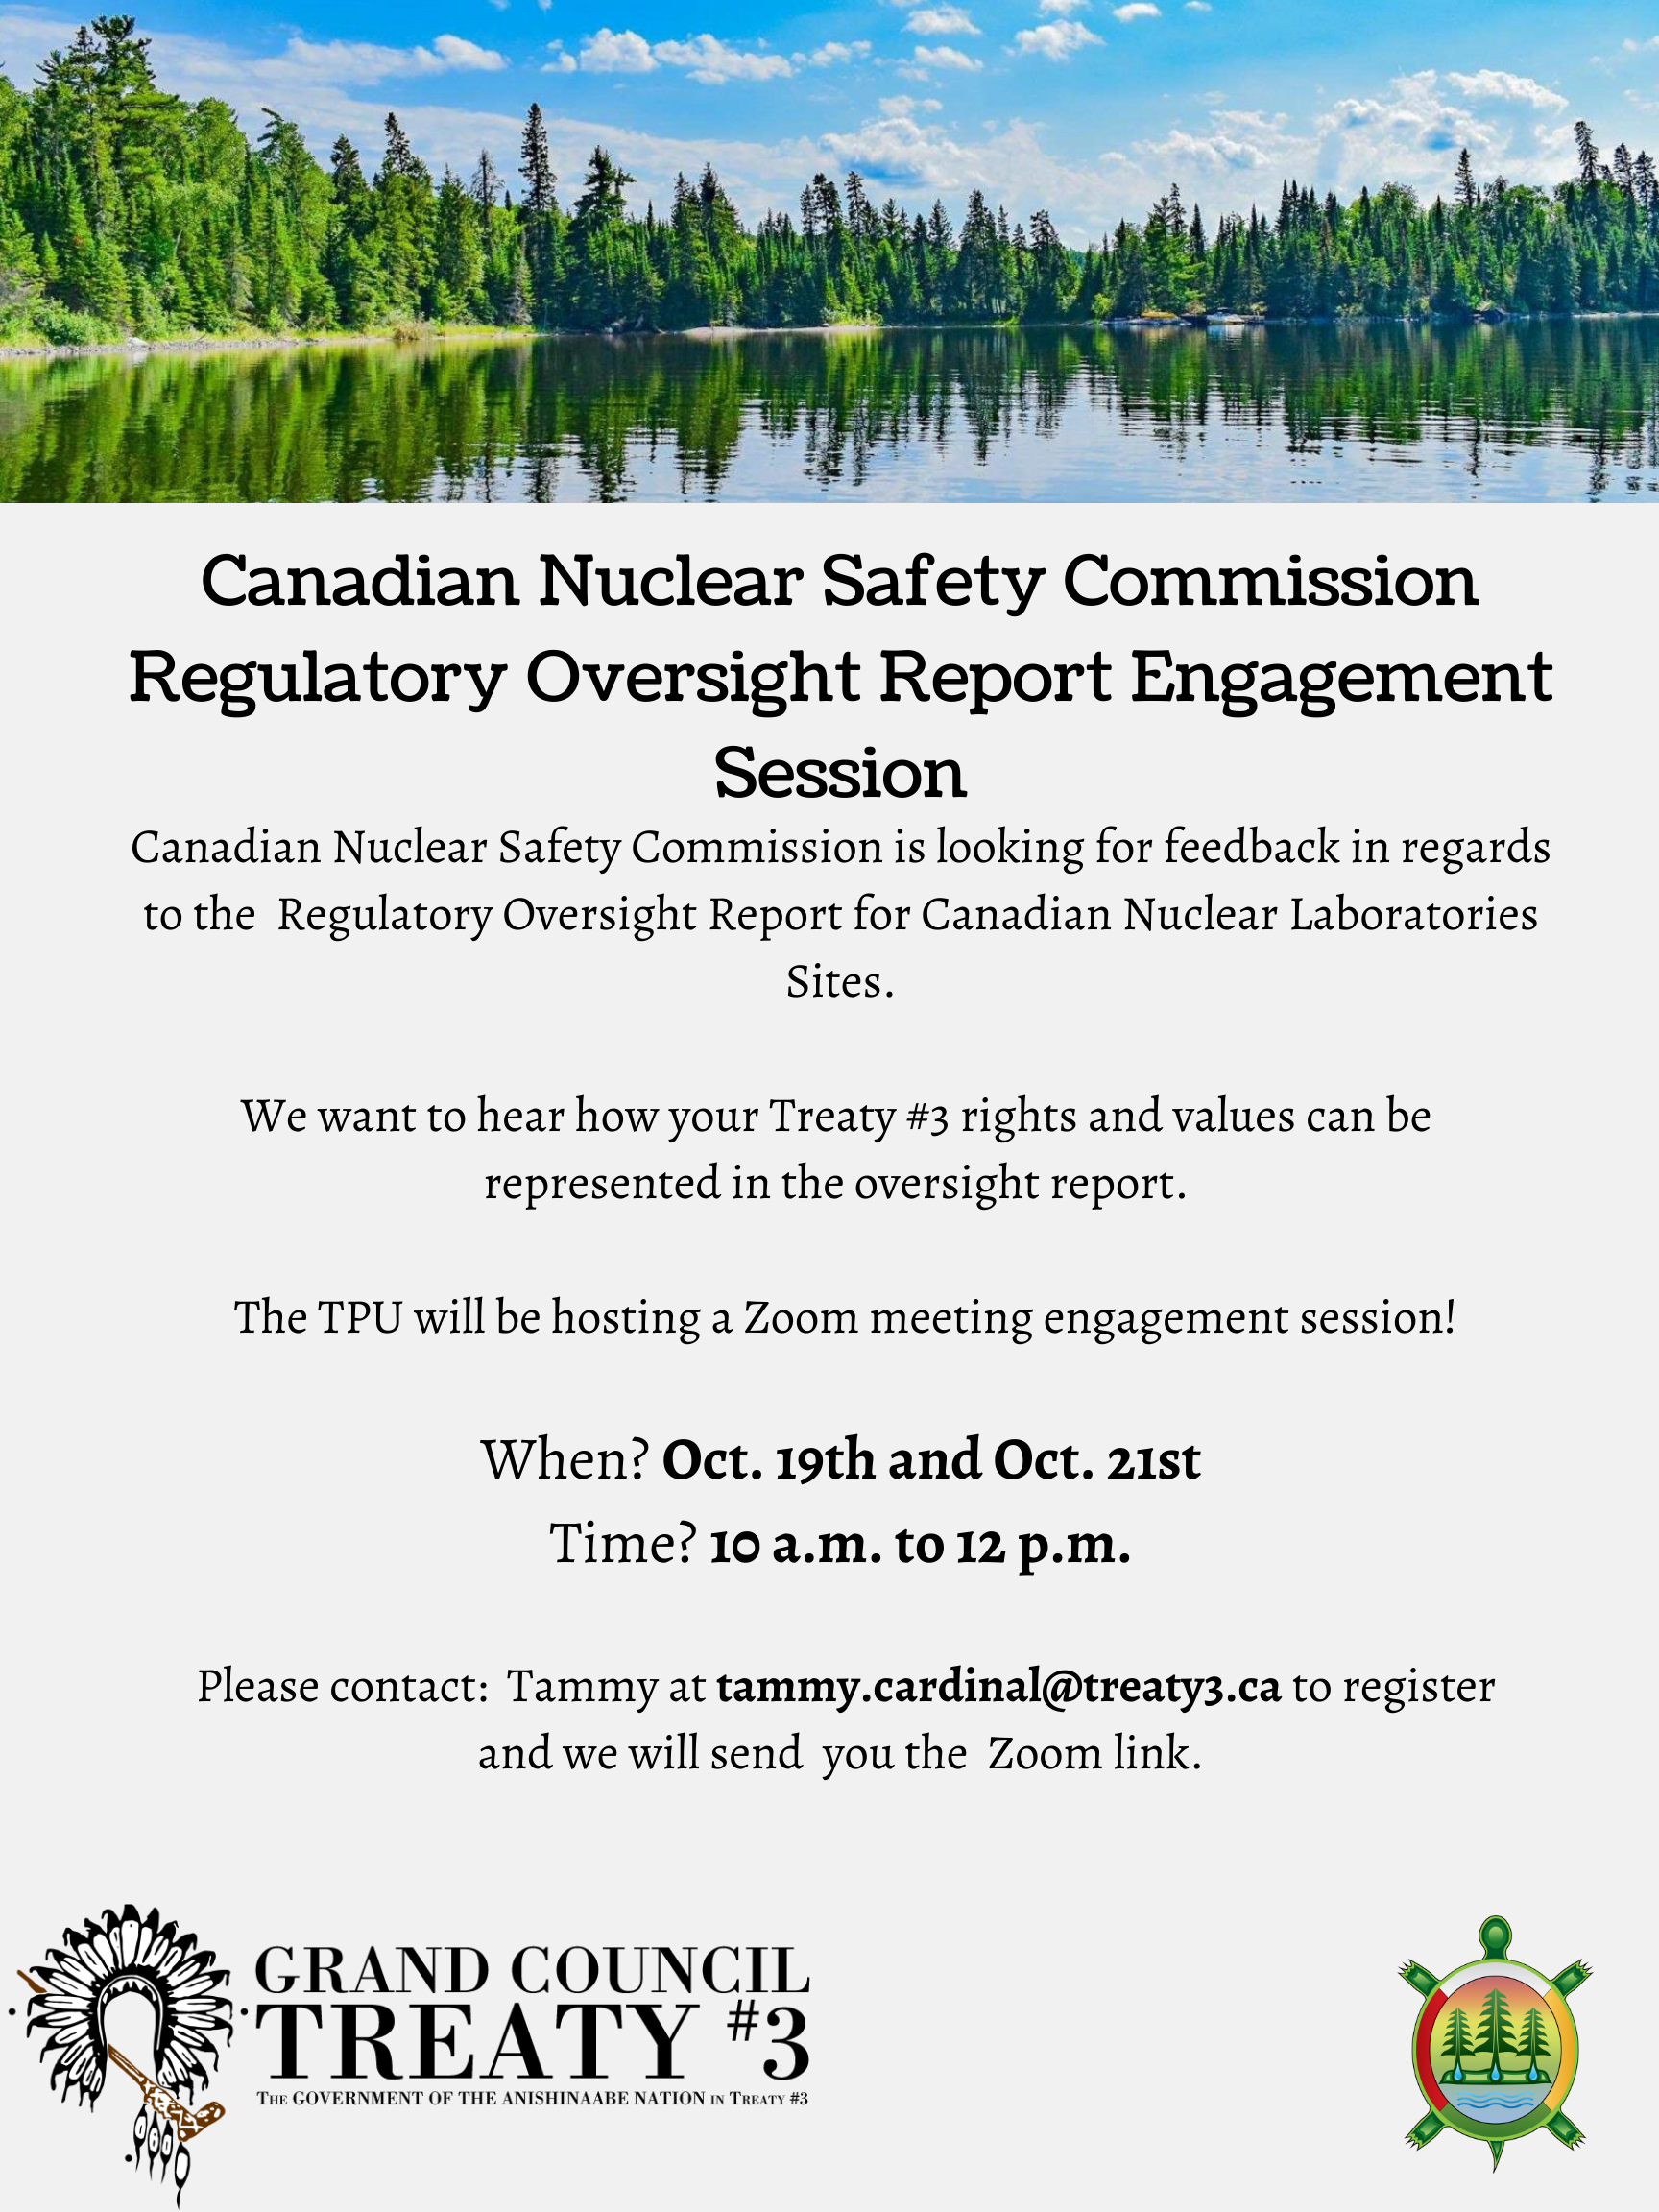 Canadian Nuclear Safety Commission Regulatory Oversight Report Engagement Session